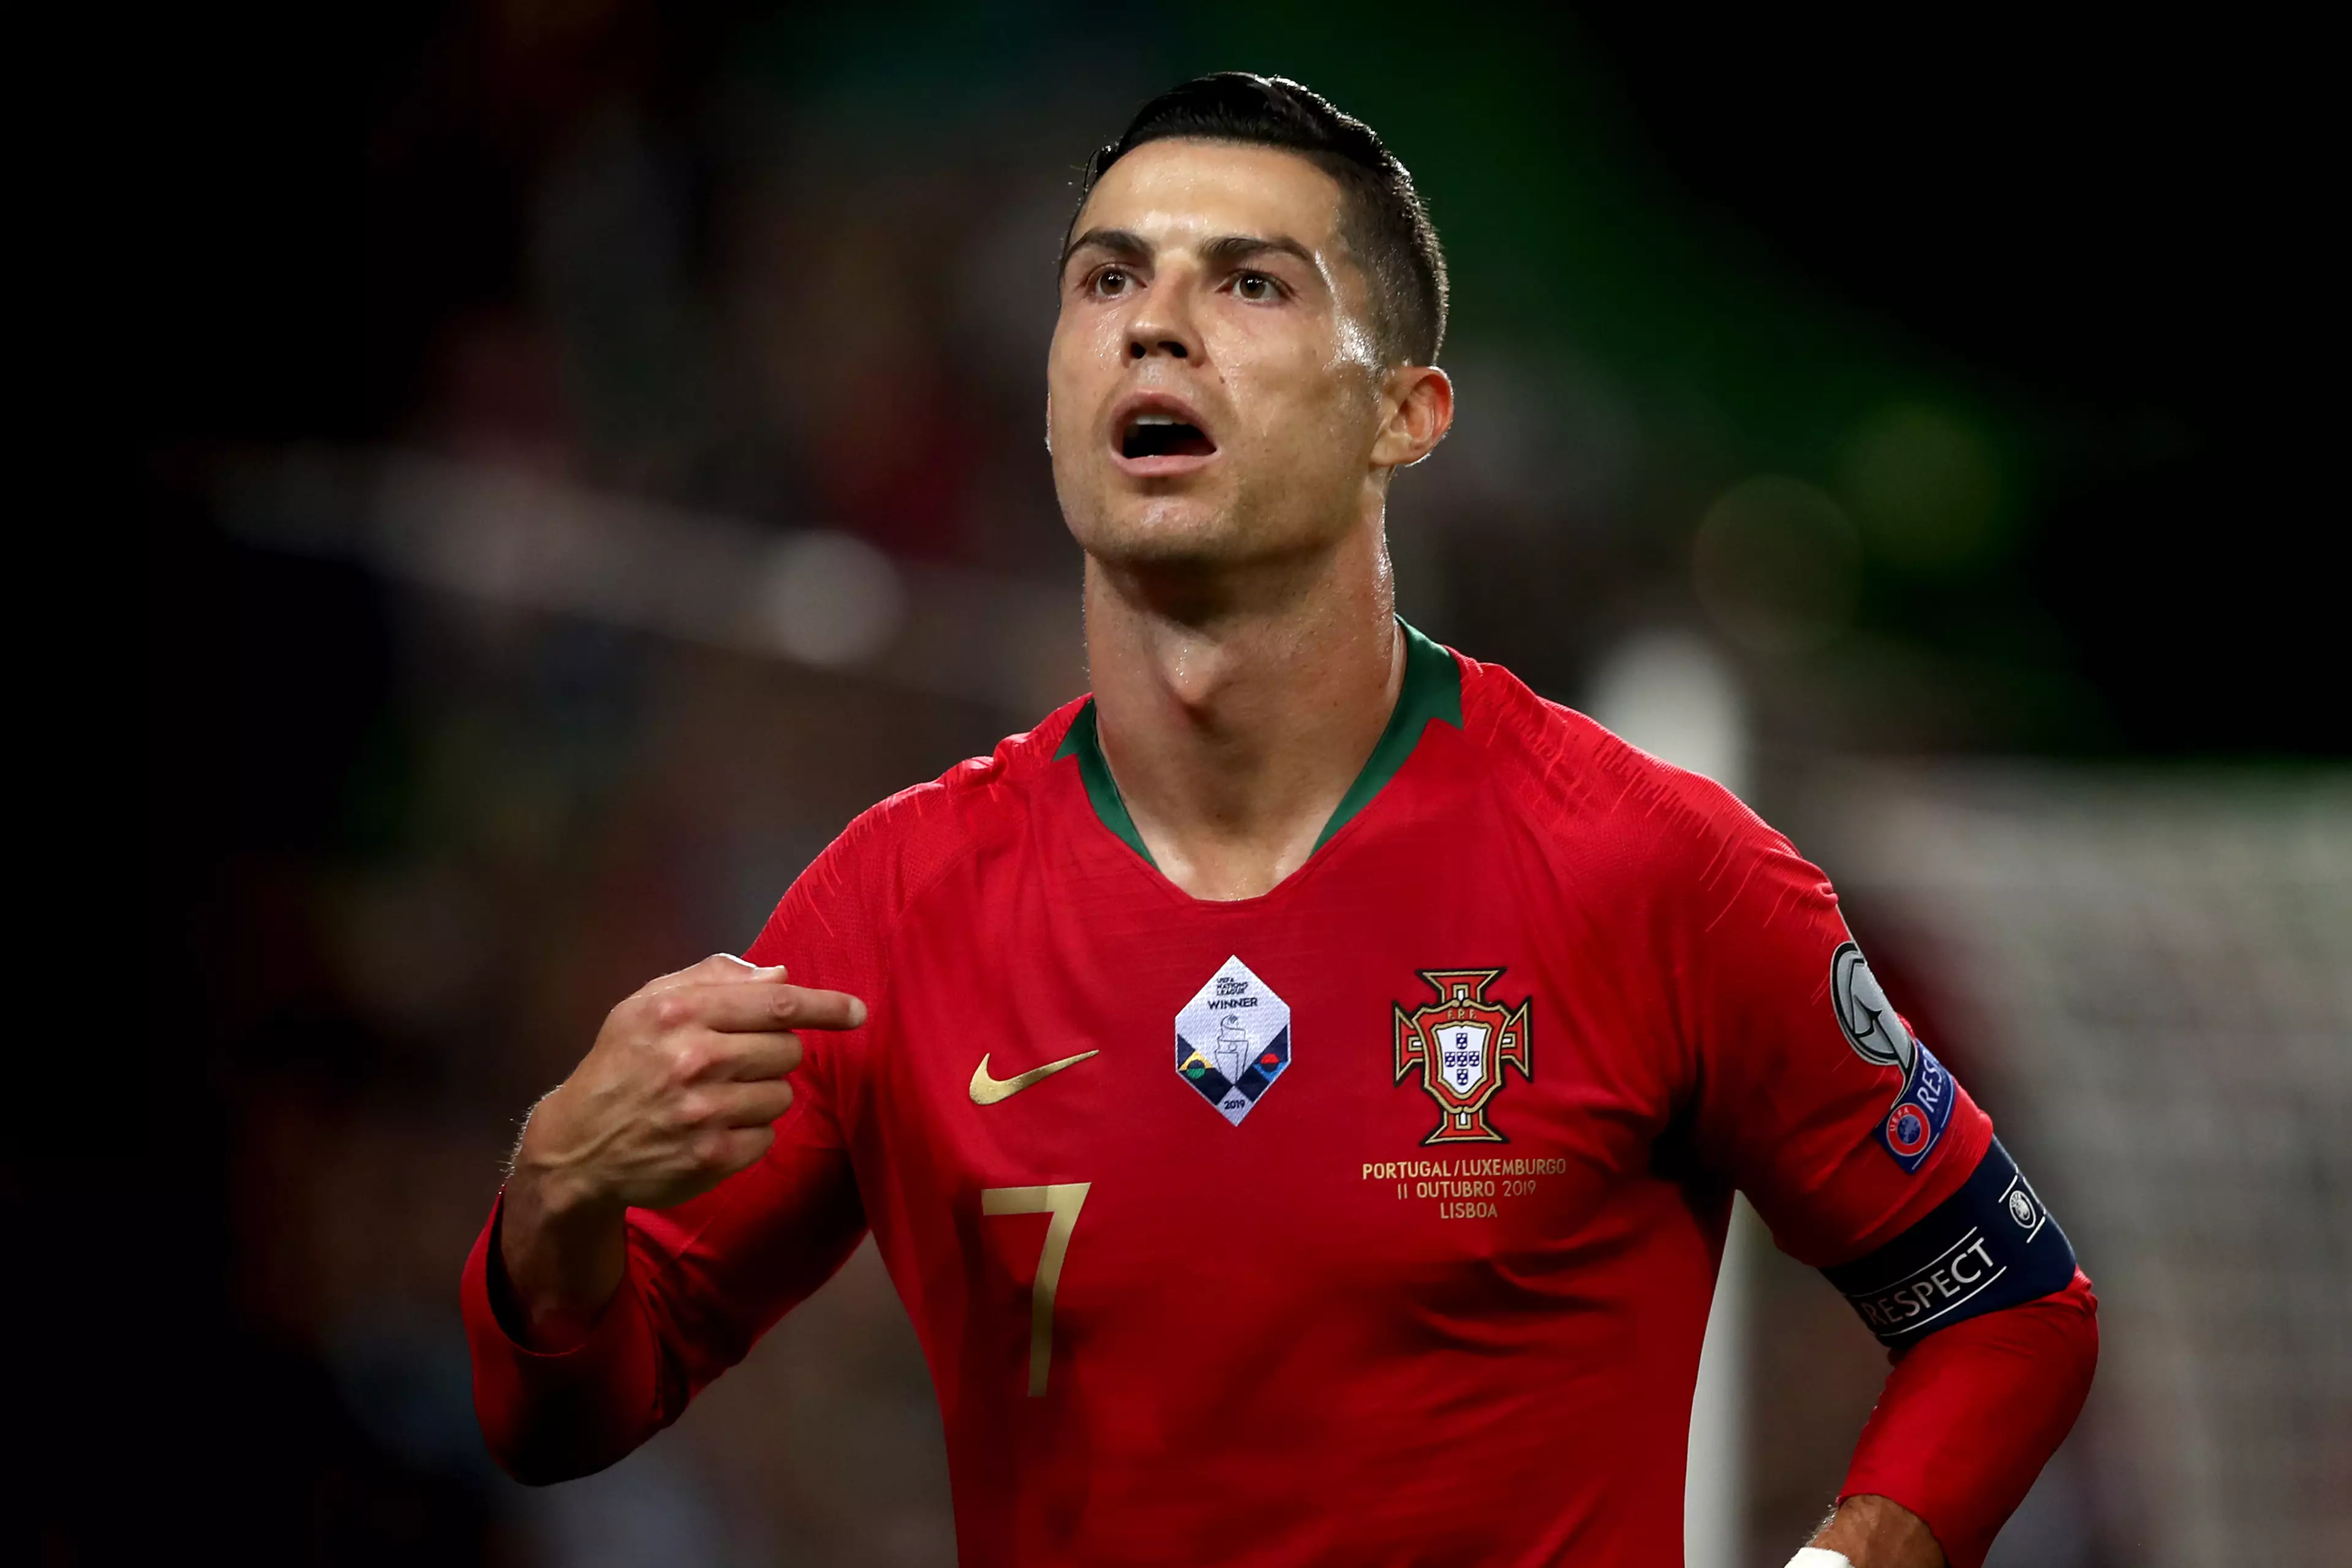 Ronaldo is getting closer to Ali Daei's record. Image: PA Images